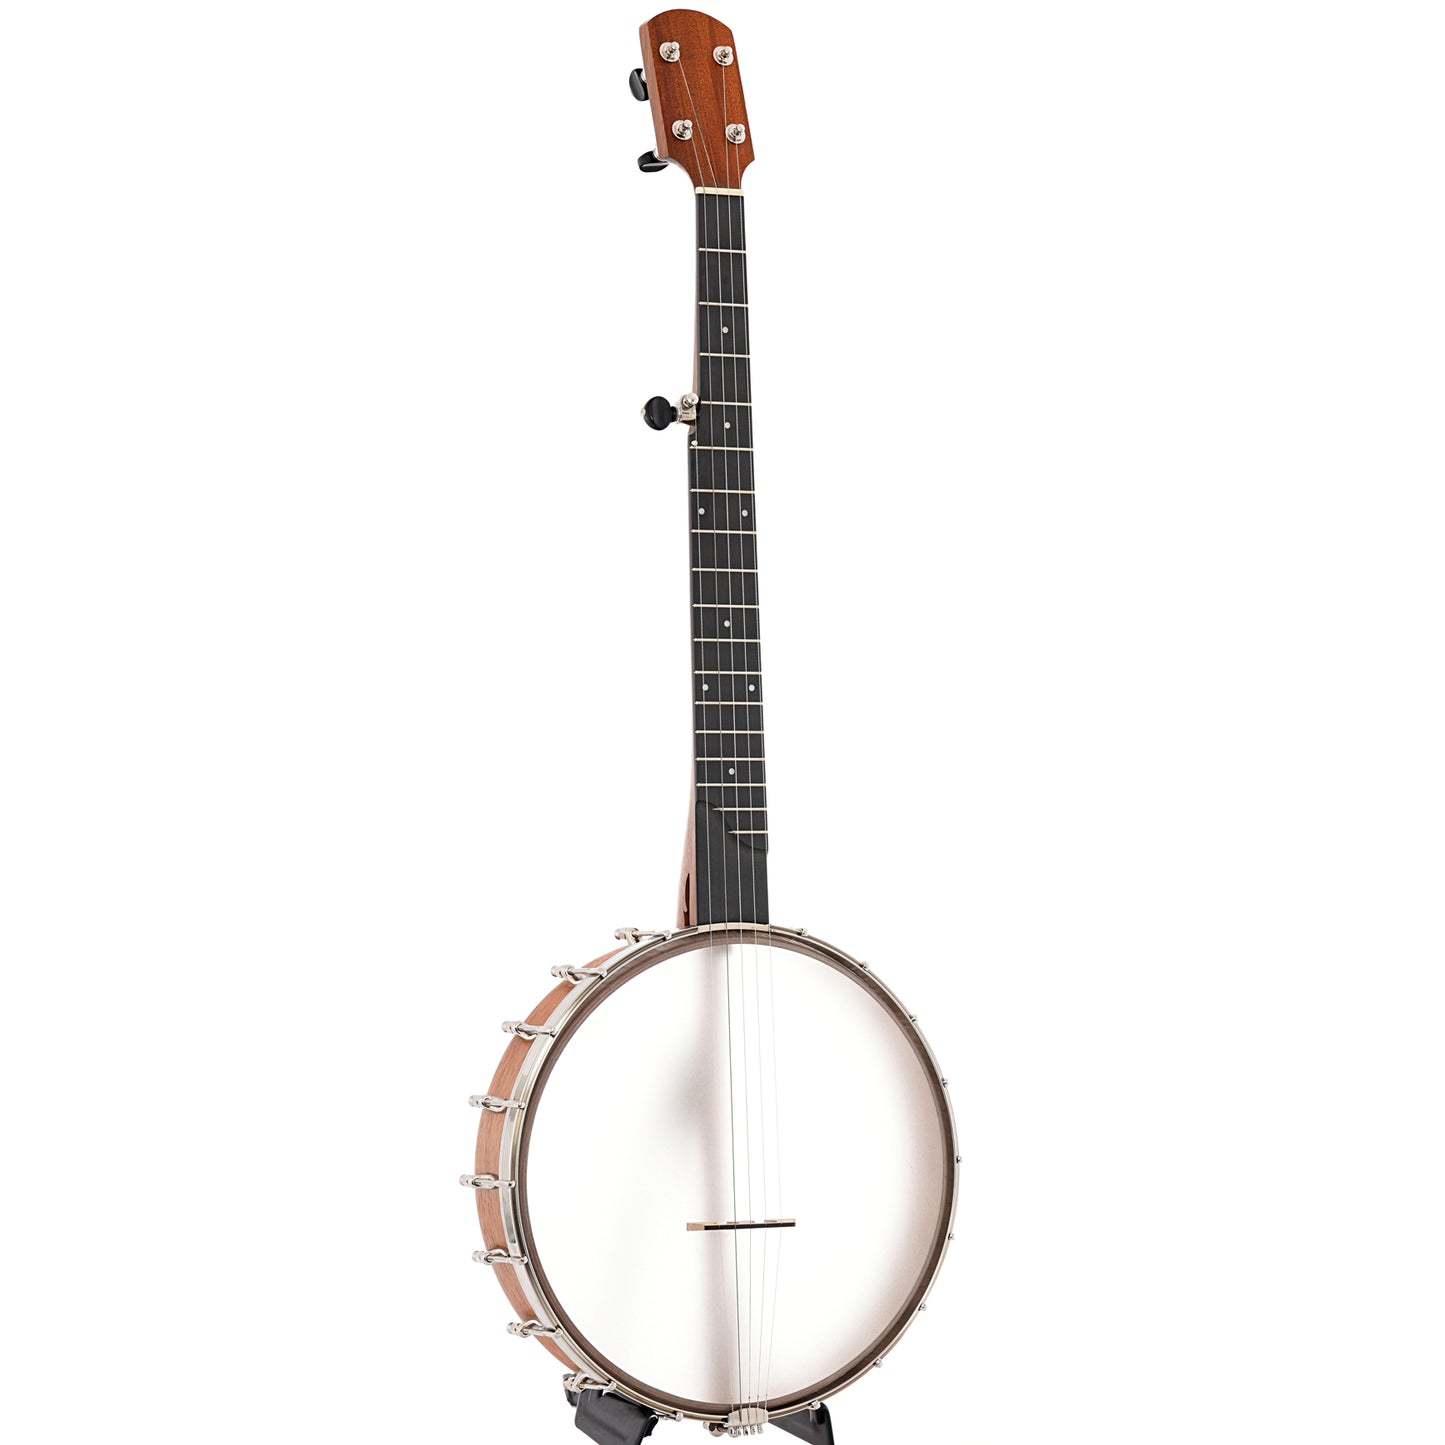 Full front and side of Kevin Enoch 12" Tradesman Banjo